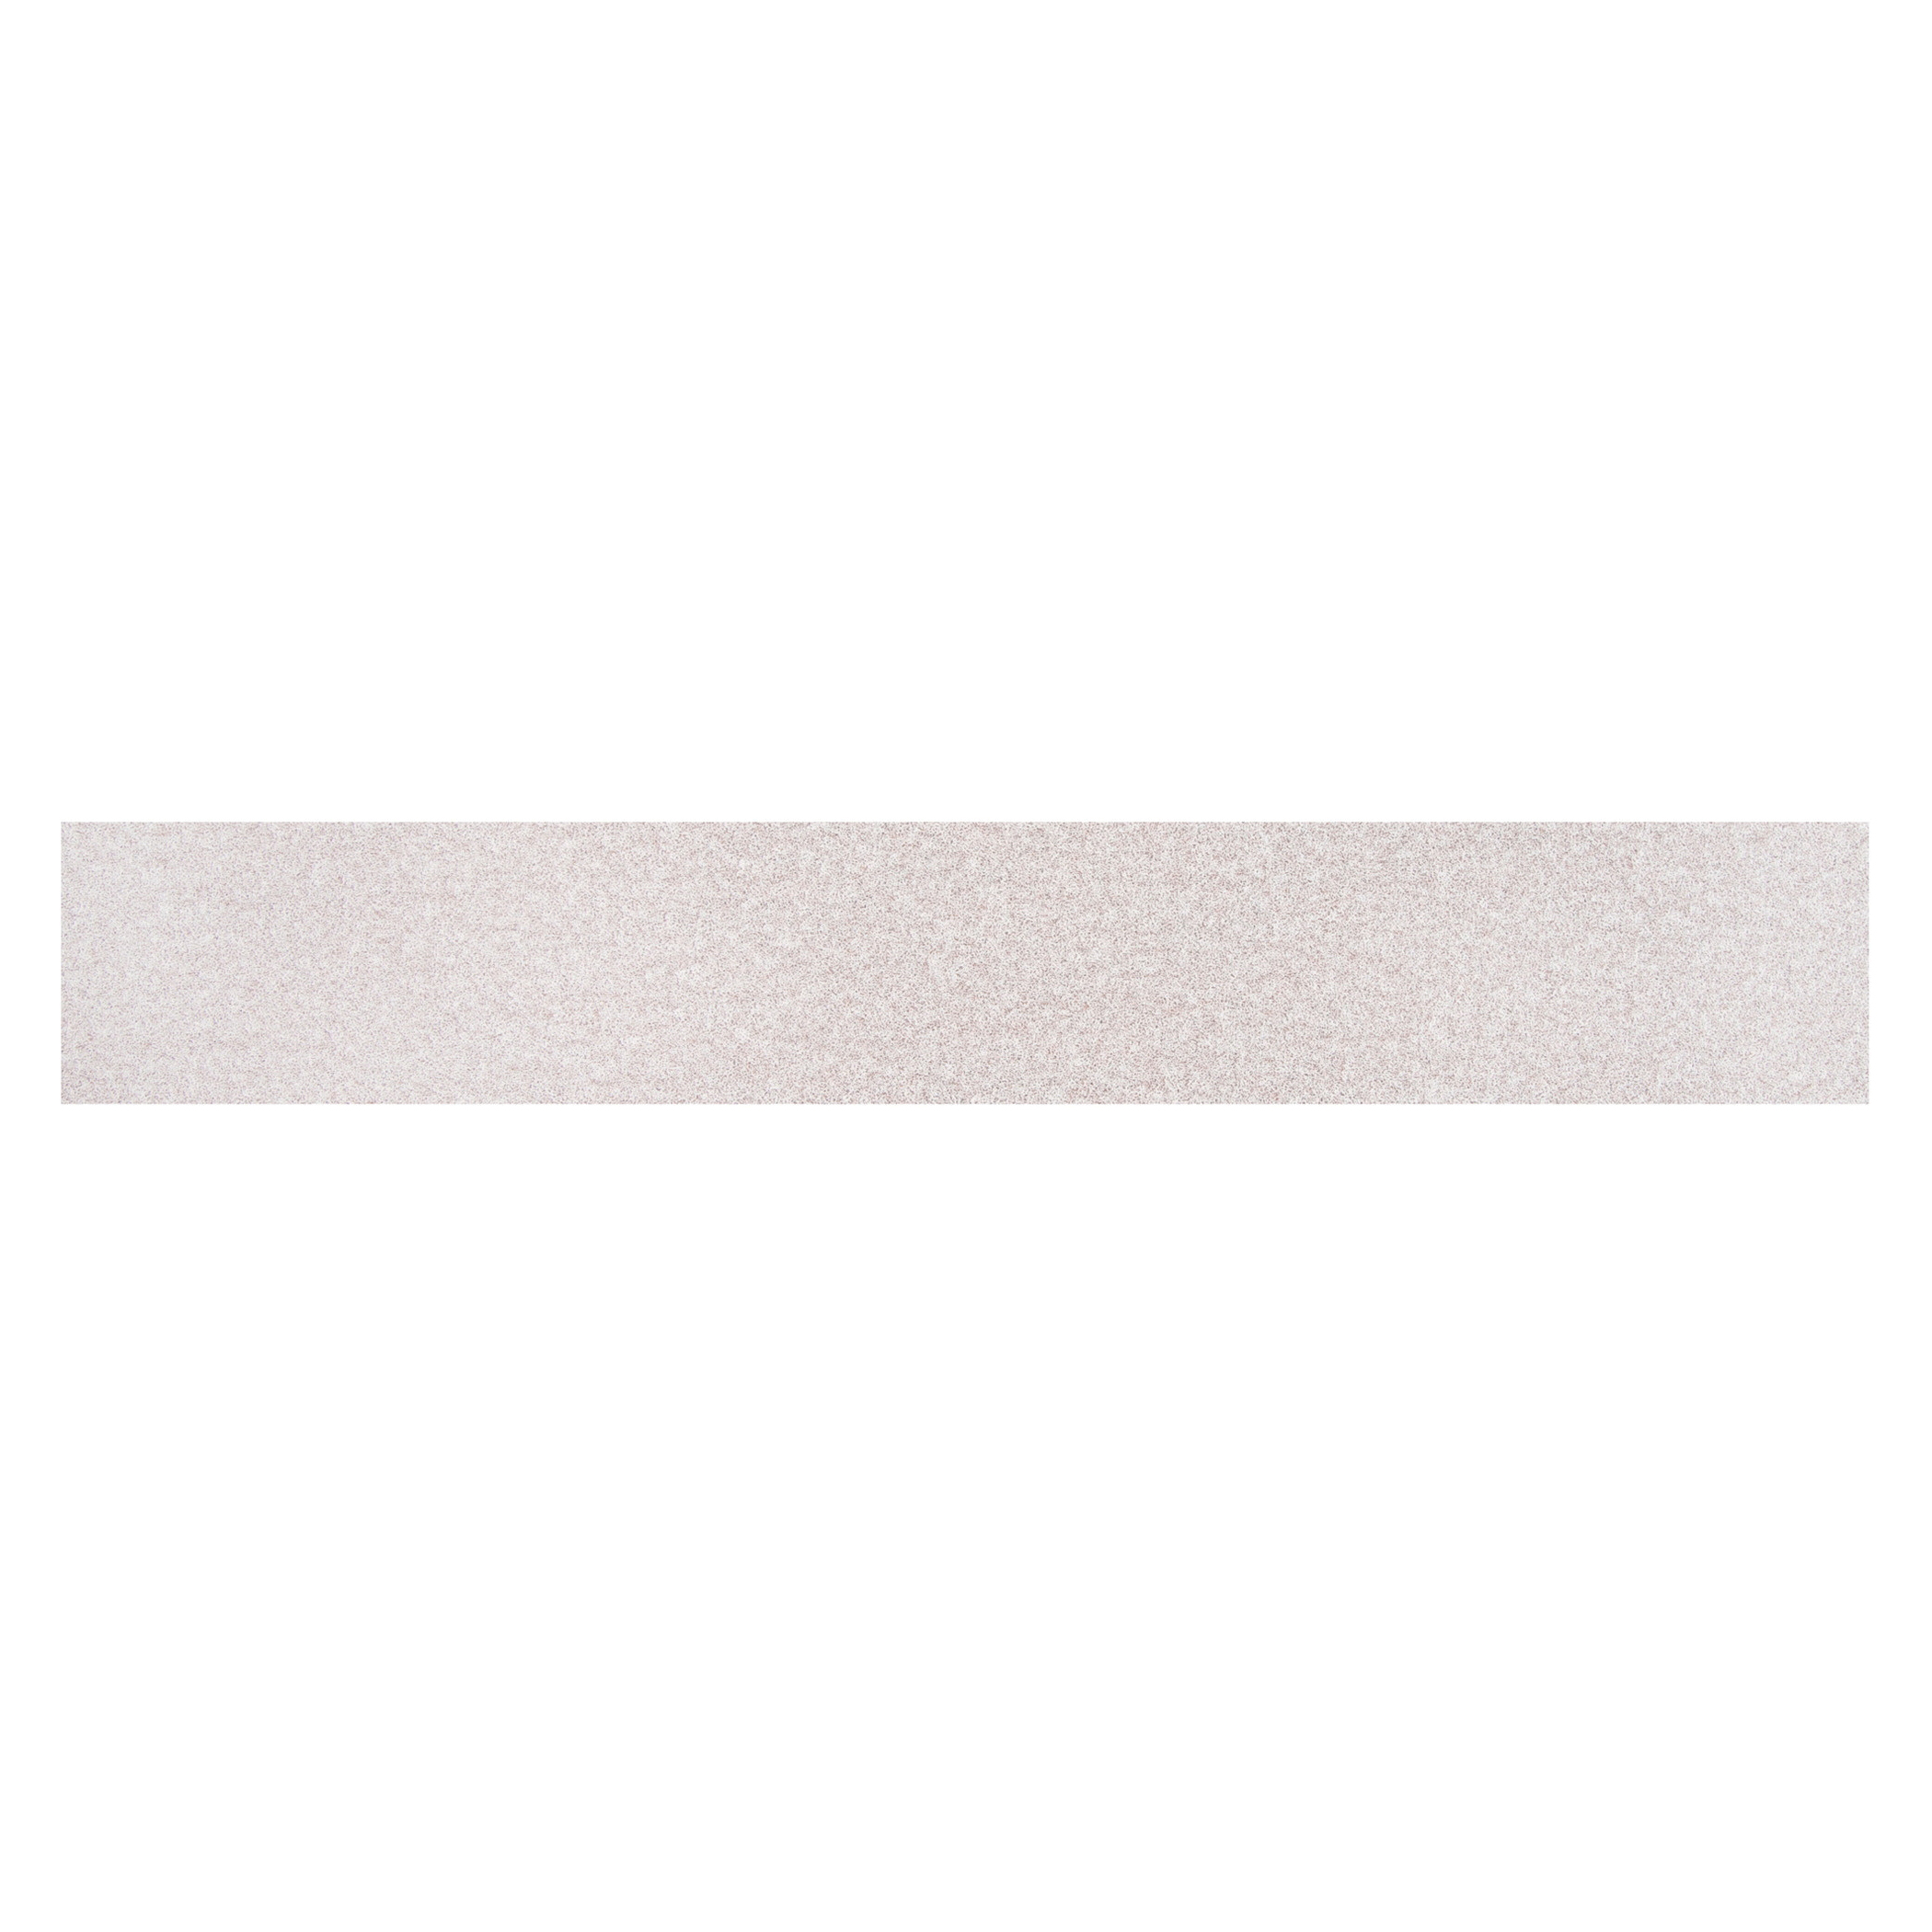 Norton® 66261131646 A275OP Hook and Loop Coated File Strip, 16-1/2 in L x 2-3/4 in W, P80 Grit, Coarse Grade, Aluminum Oxide Abrasive, Anti-Loading Paper Backing